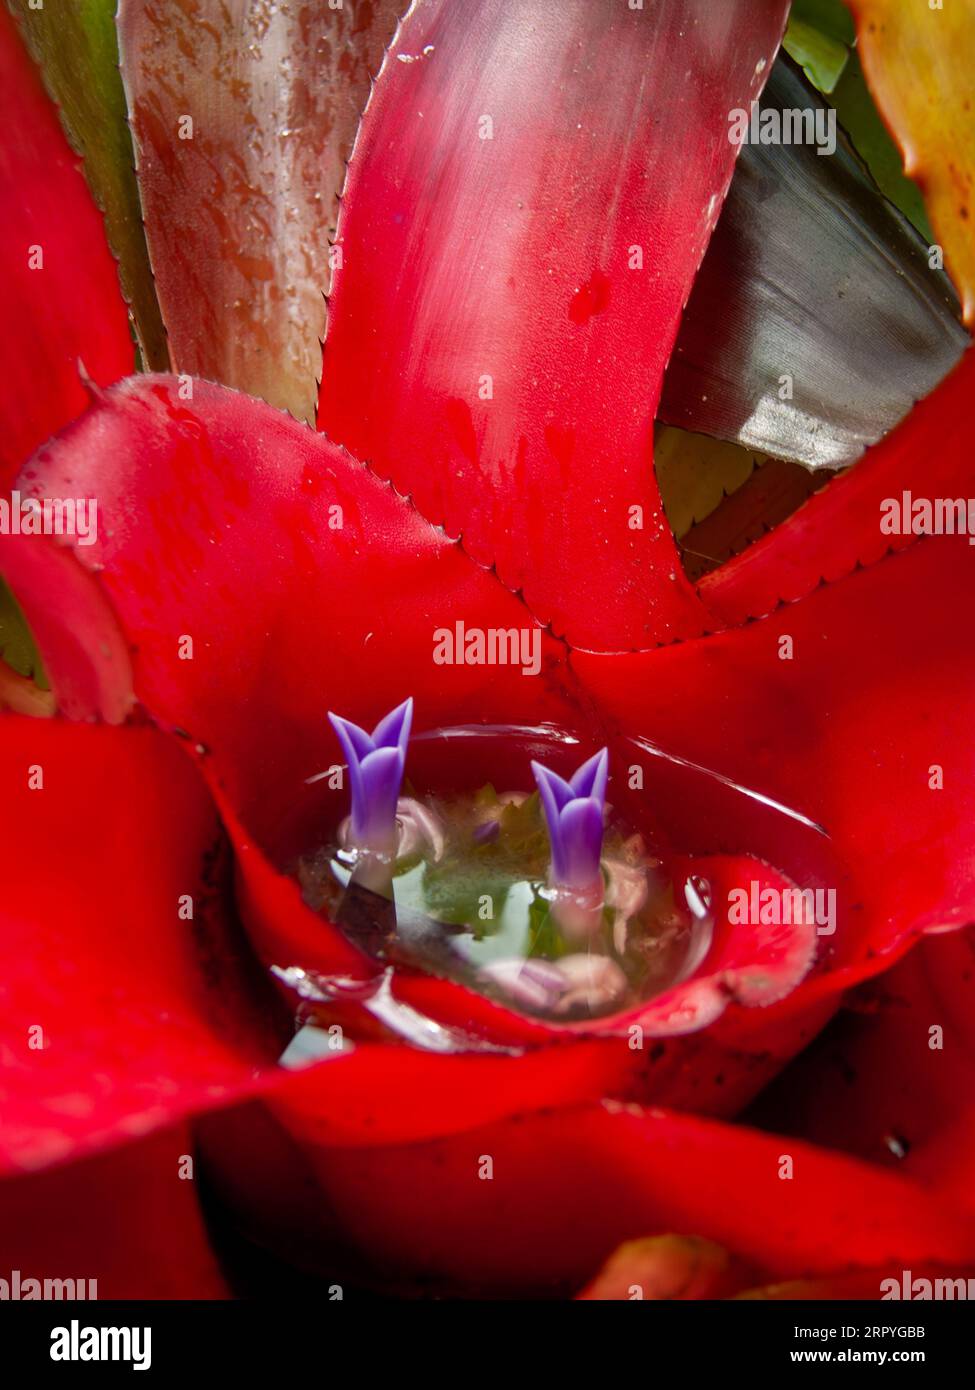 Bromeliad, Neoregelia, red inflorescence showing blue flowers at centre, Cultivated, Malanda, Australia. Stock Photo